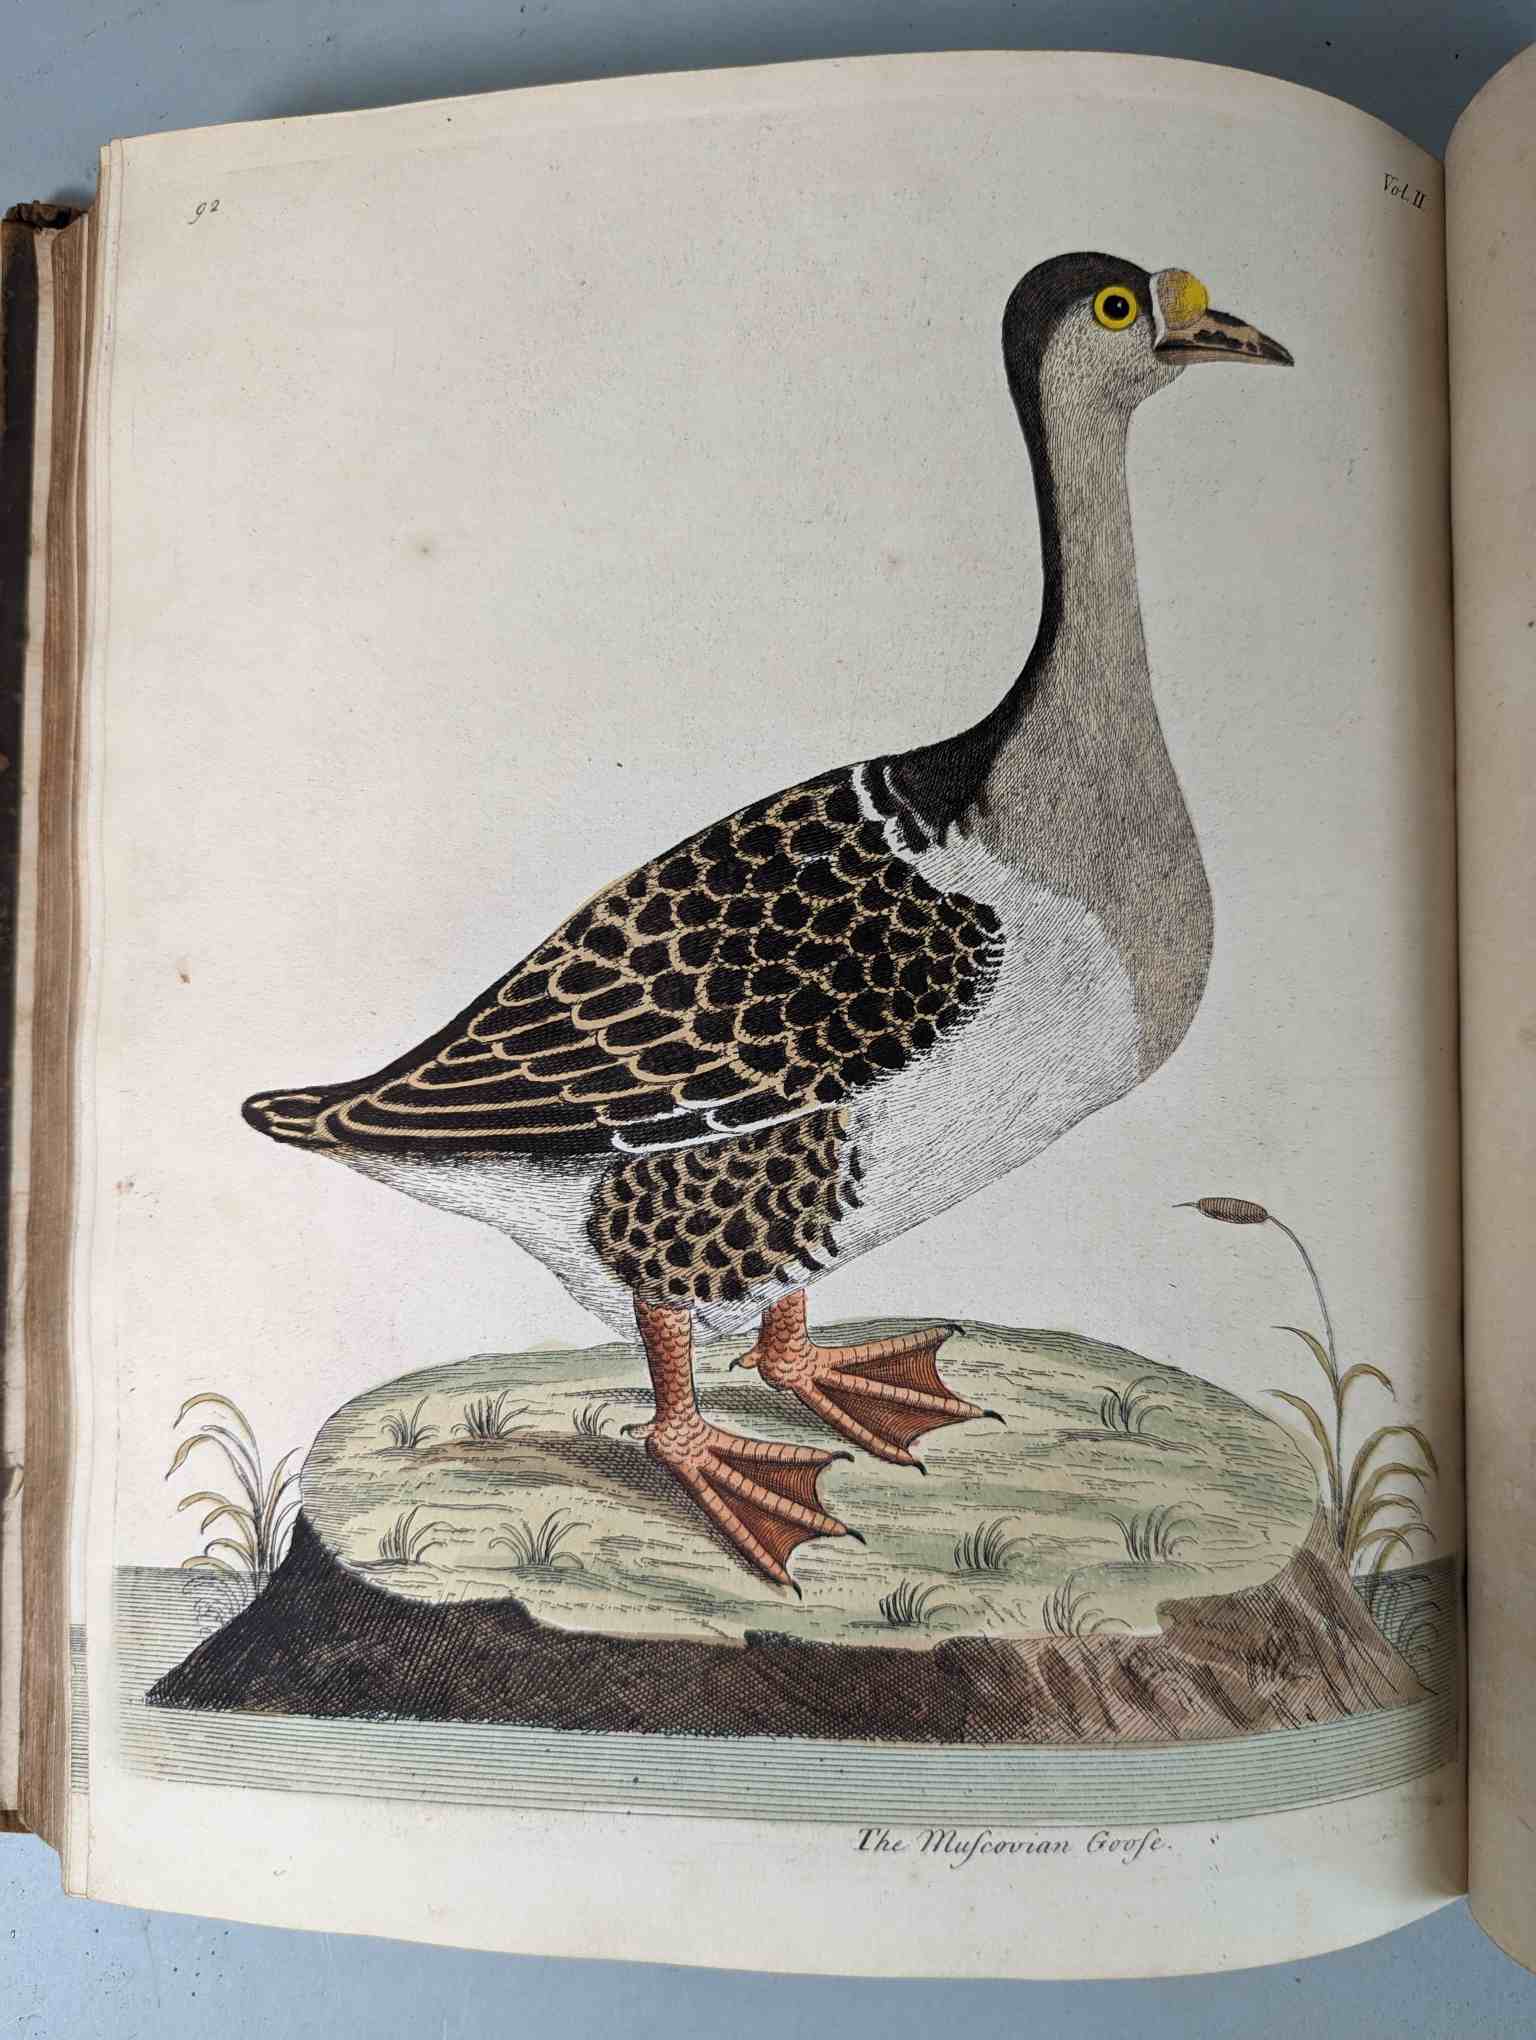 ALBIN, Eleazar. A Natural History of Birds, to which are added, Notes and Observations by W. - Image 196 of 208